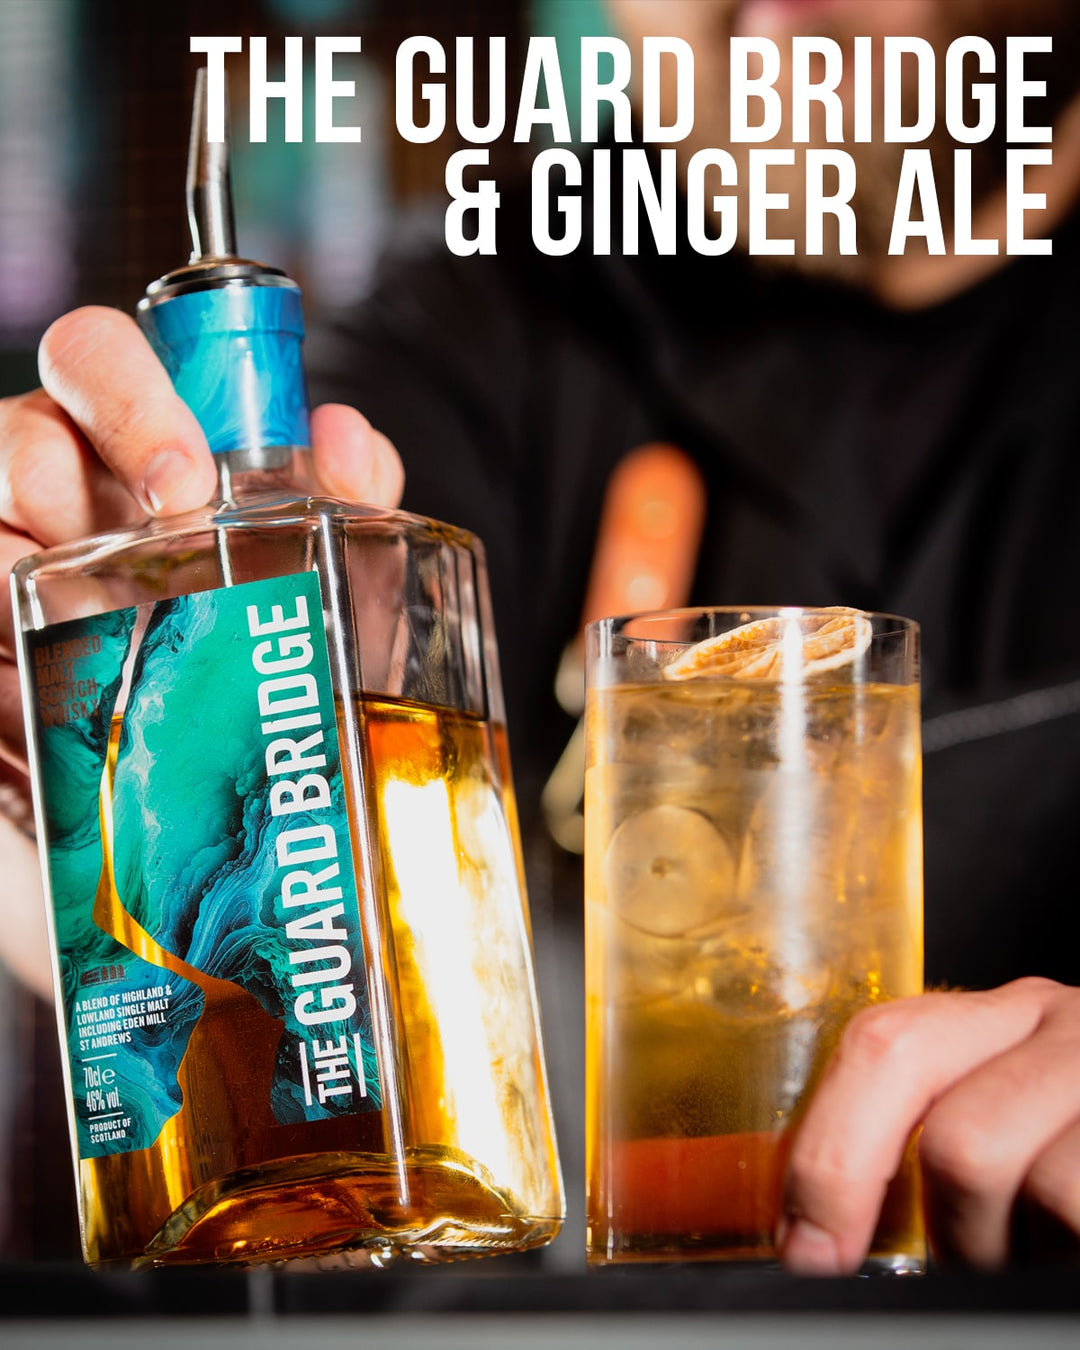 How to Make The Guard Bridge & Ginger Ale Highball  | The Guard Bridge Whisky